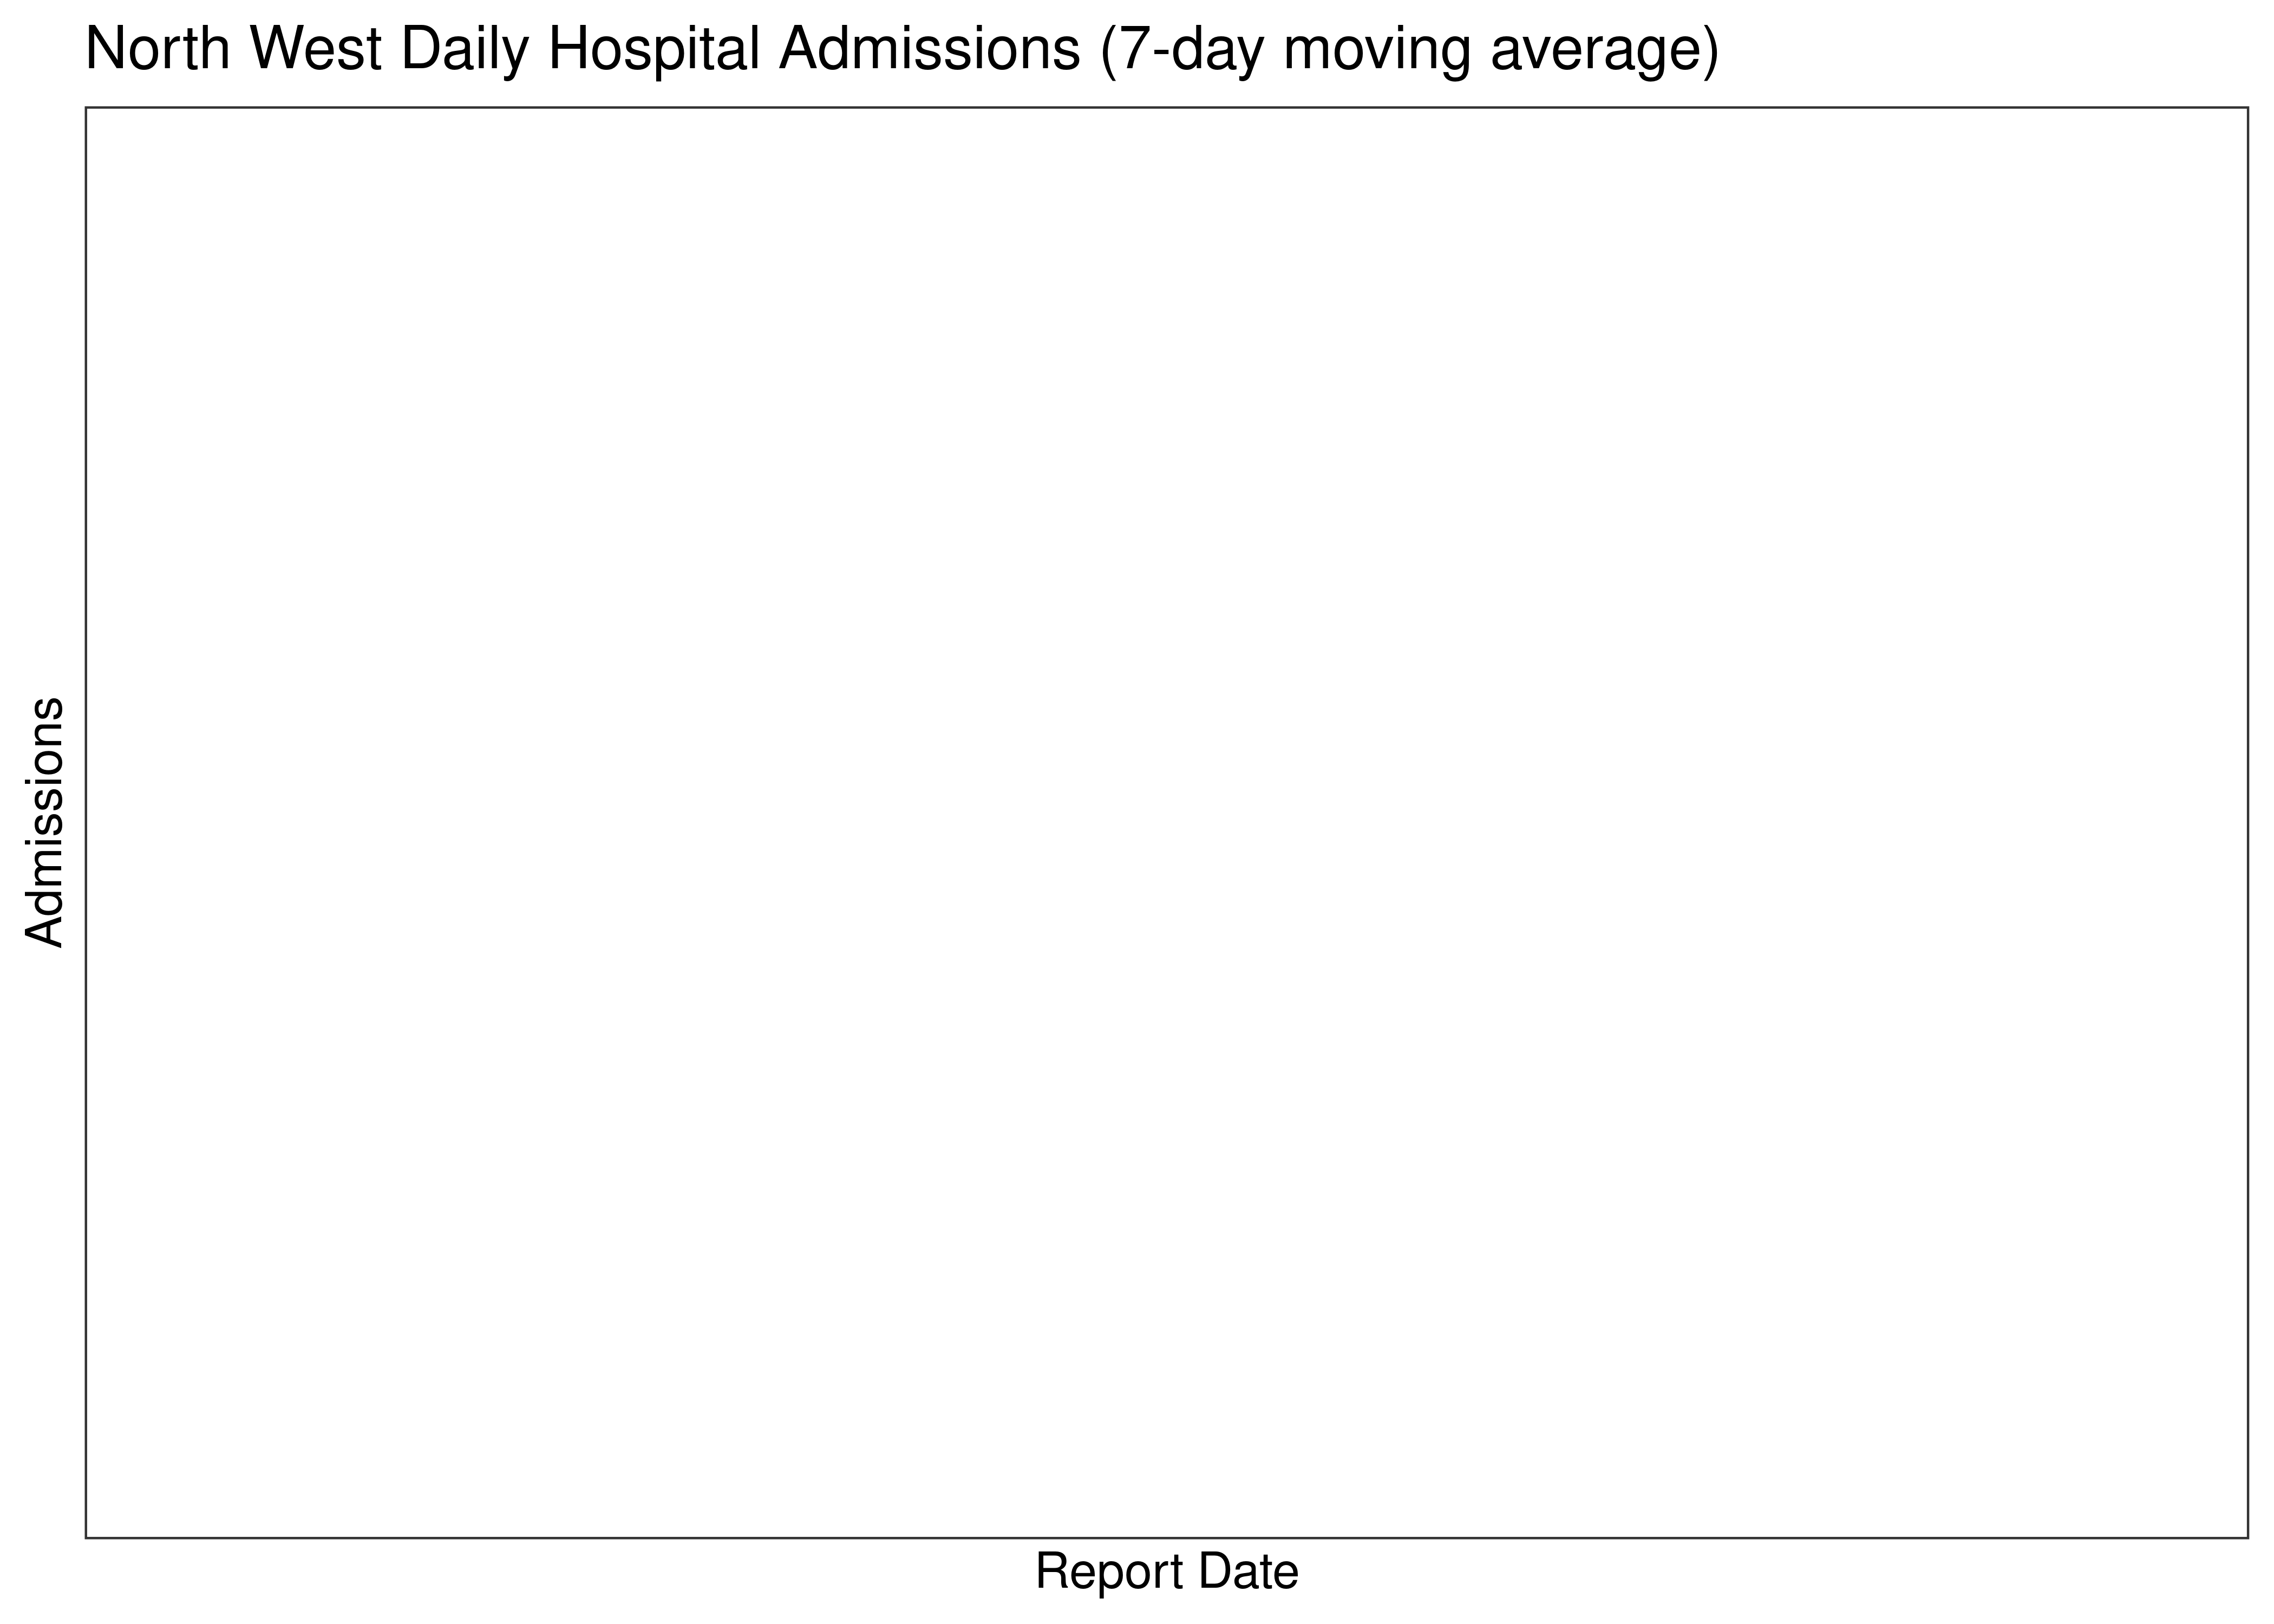 North West Daily Hospital Admissions for Last 30-days (7-day moving average)